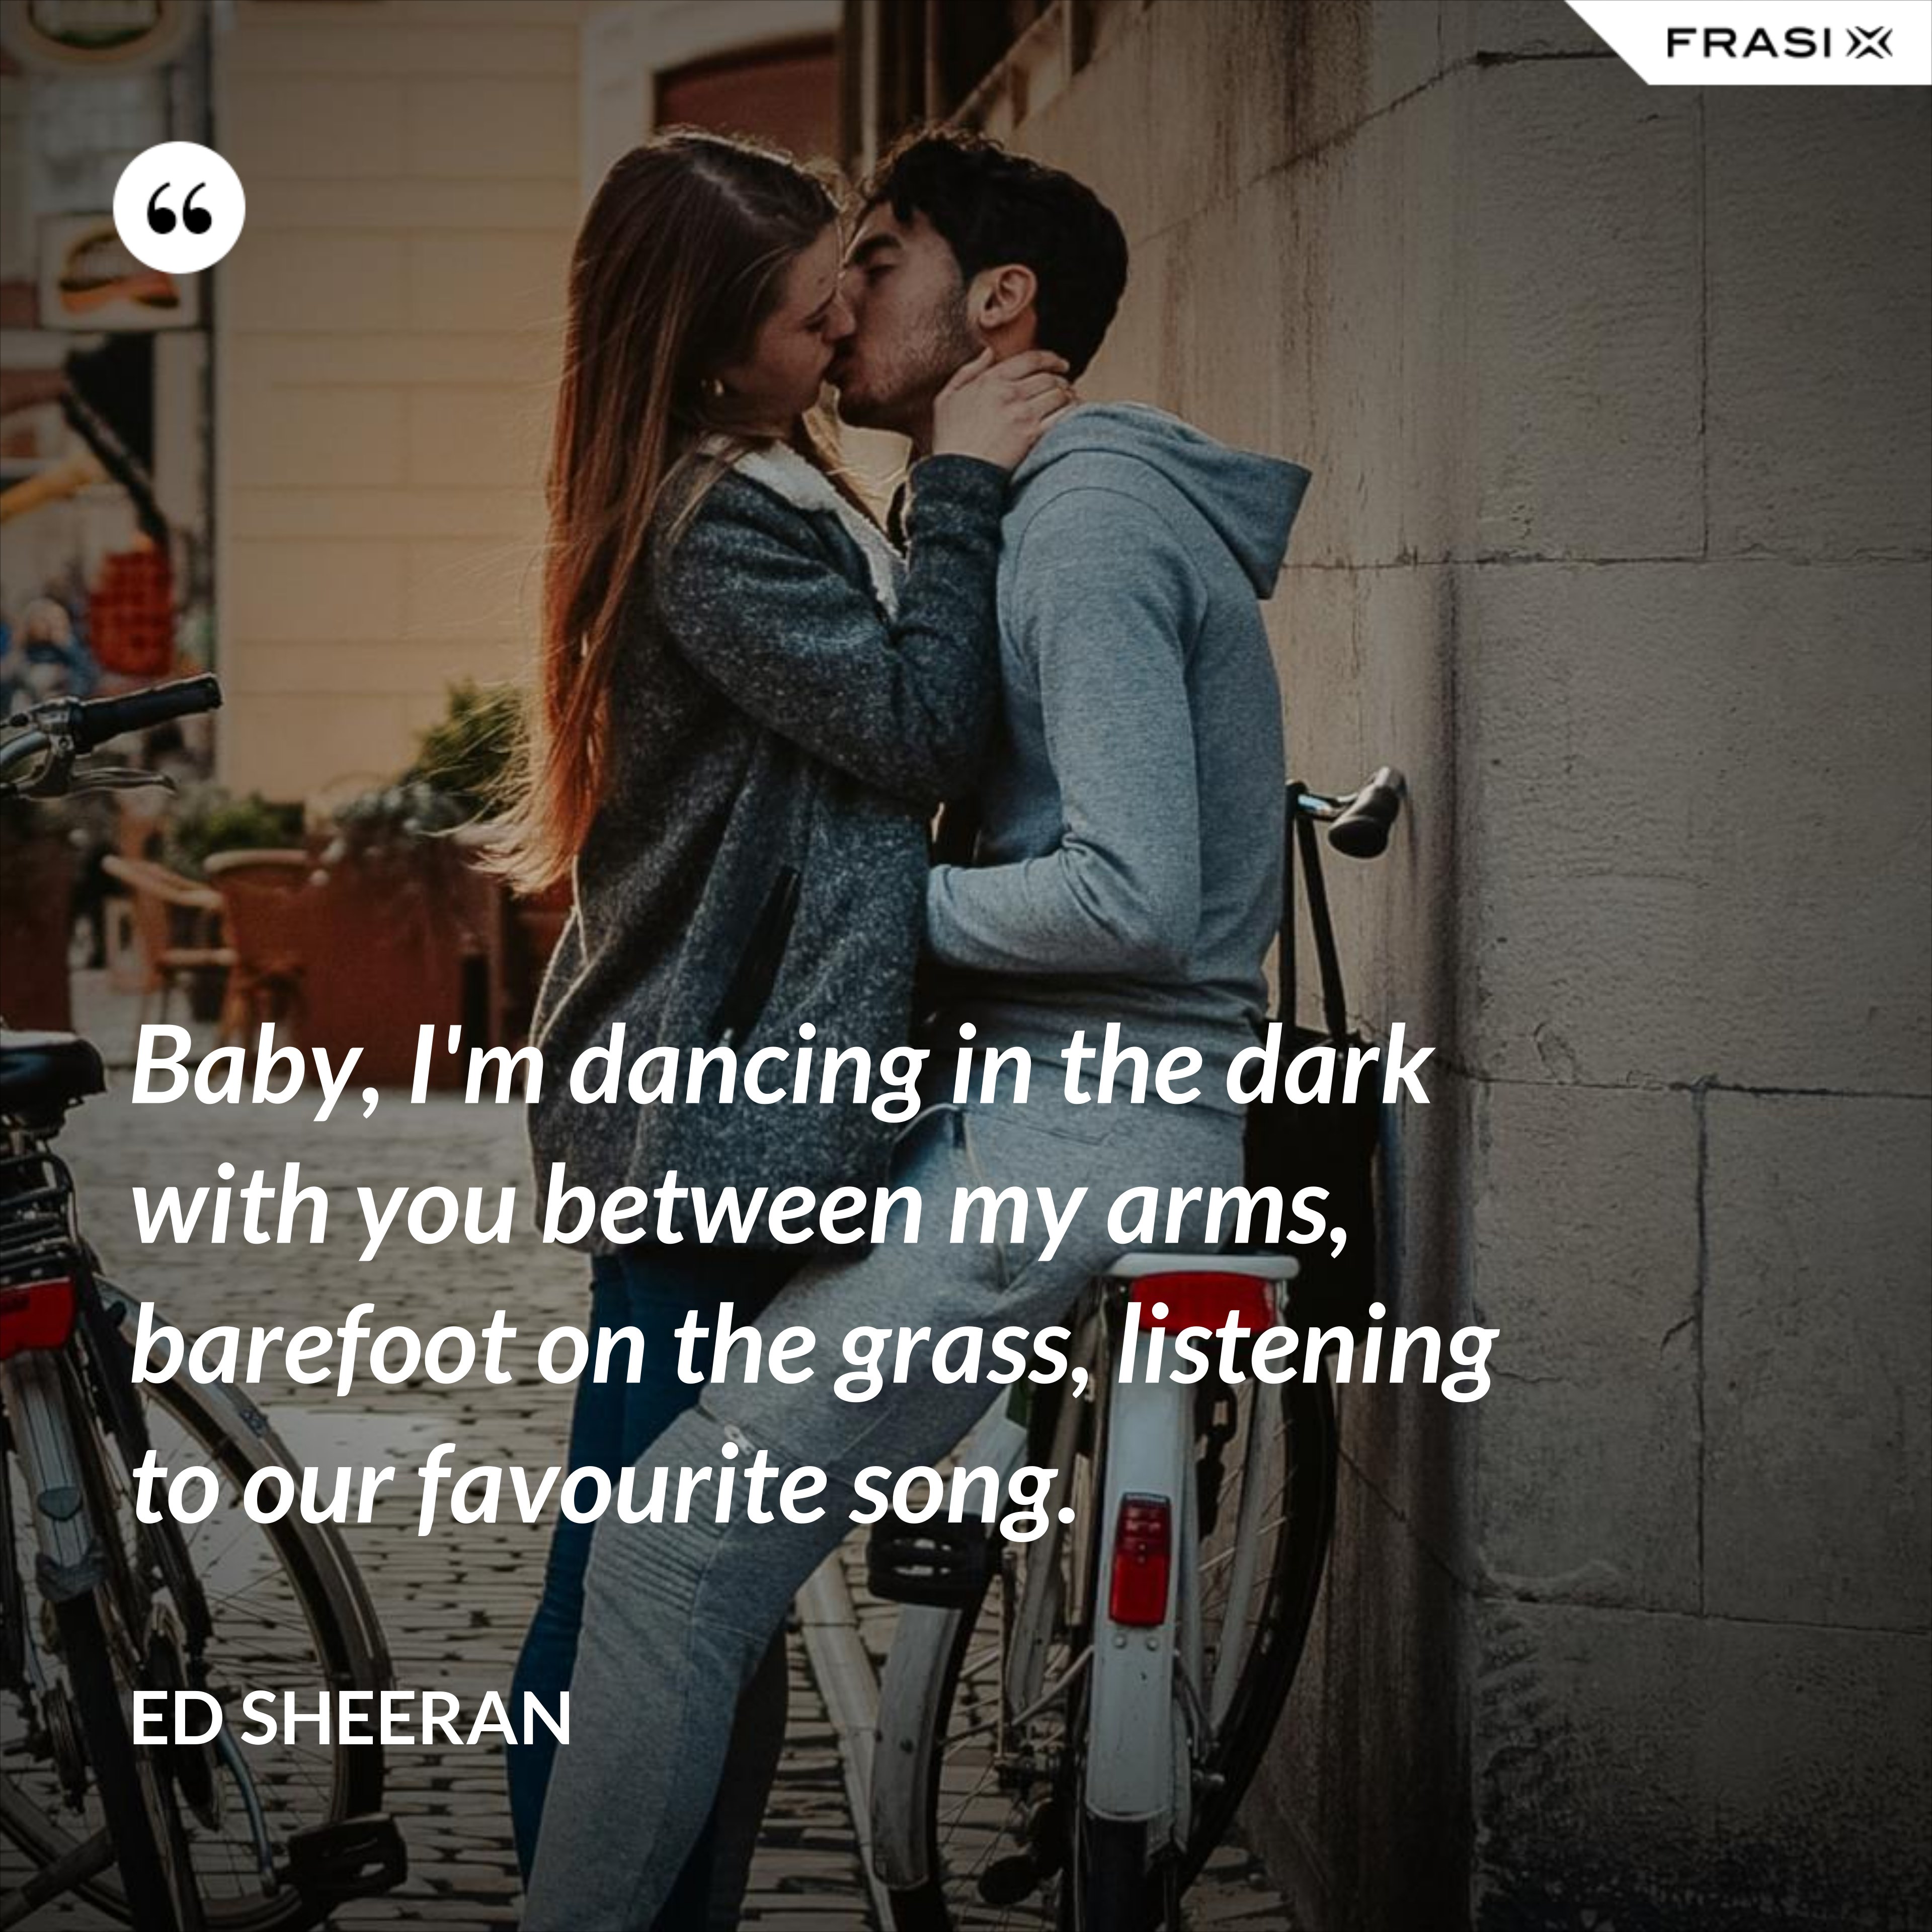 Baby, I'm dancing in the dark with you between my arms, barefoot on the grass, listening to our favourite song. - Ed Sheeran